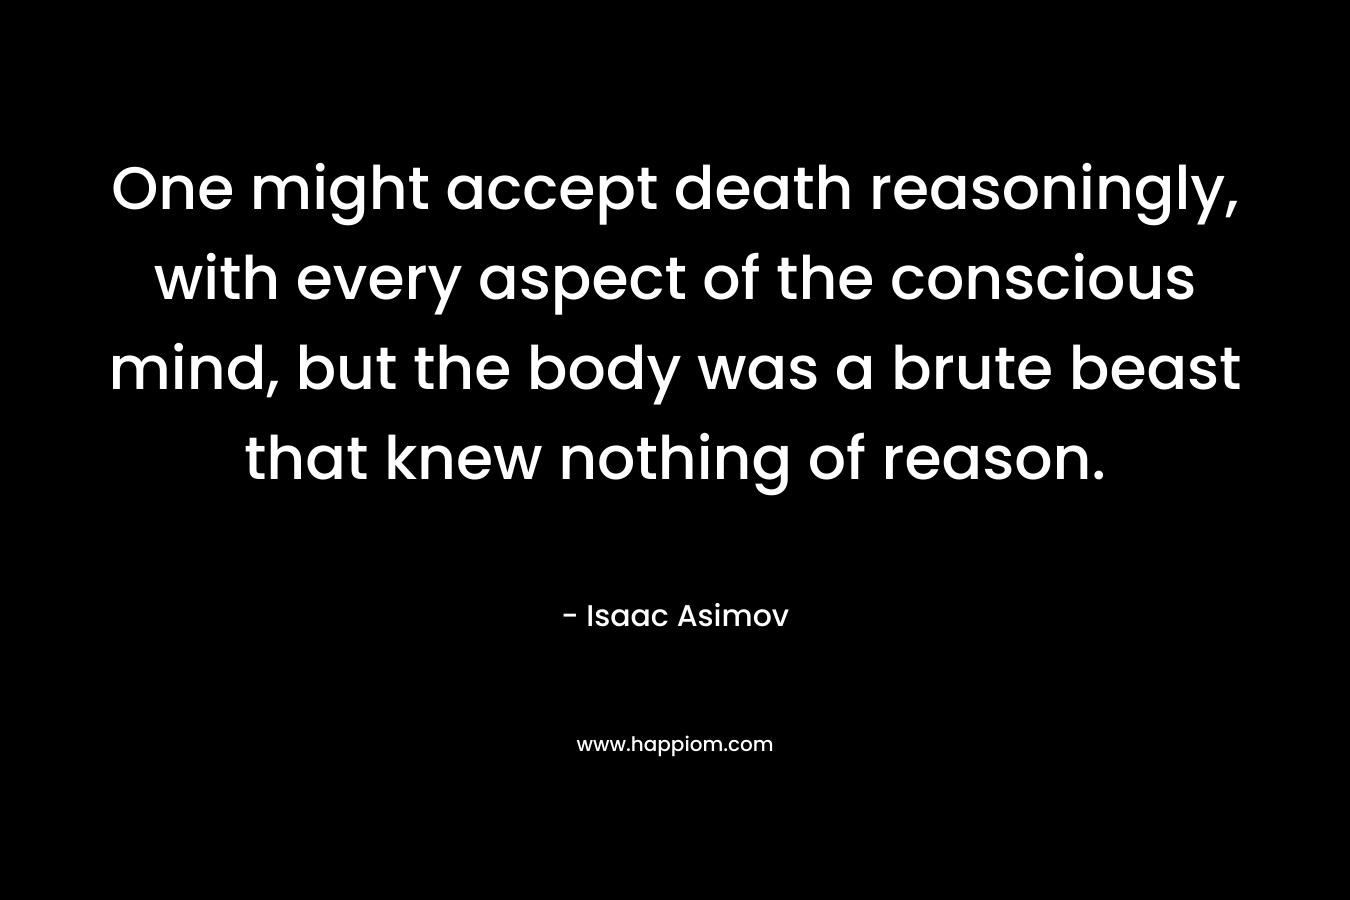 One might accept death reasoningly, with every aspect of the conscious mind, but the body was a brute beast that knew nothing of reason. – Isaac Asimov